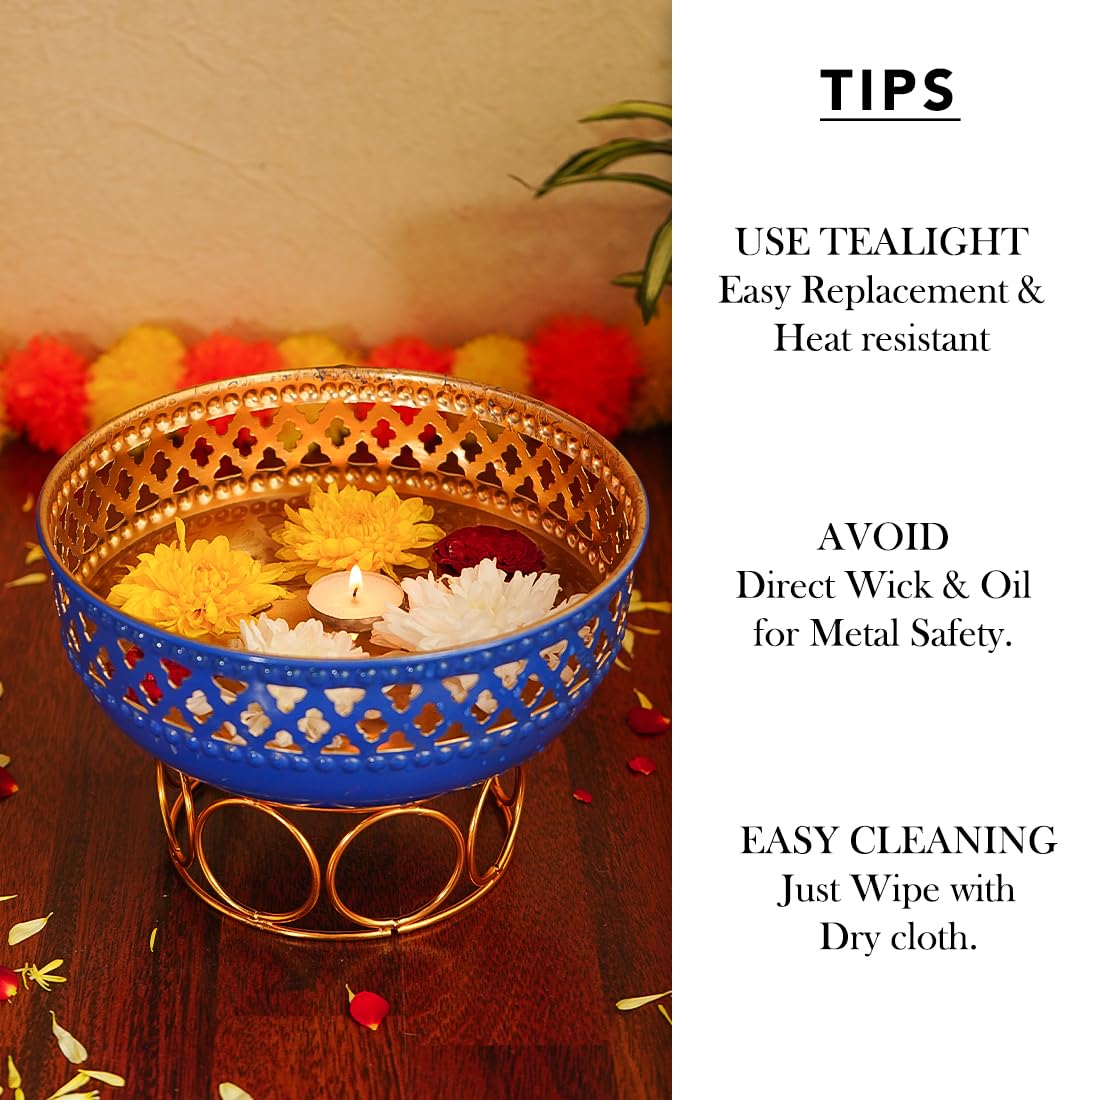 Ekhasa Blue Urli Bowl with Stand for Home Decor & Table Decoration | Floating Flowers, Tealight Candles Water Bowl for Diwali Pooja & Other Festivals | Gift for Various Occasions